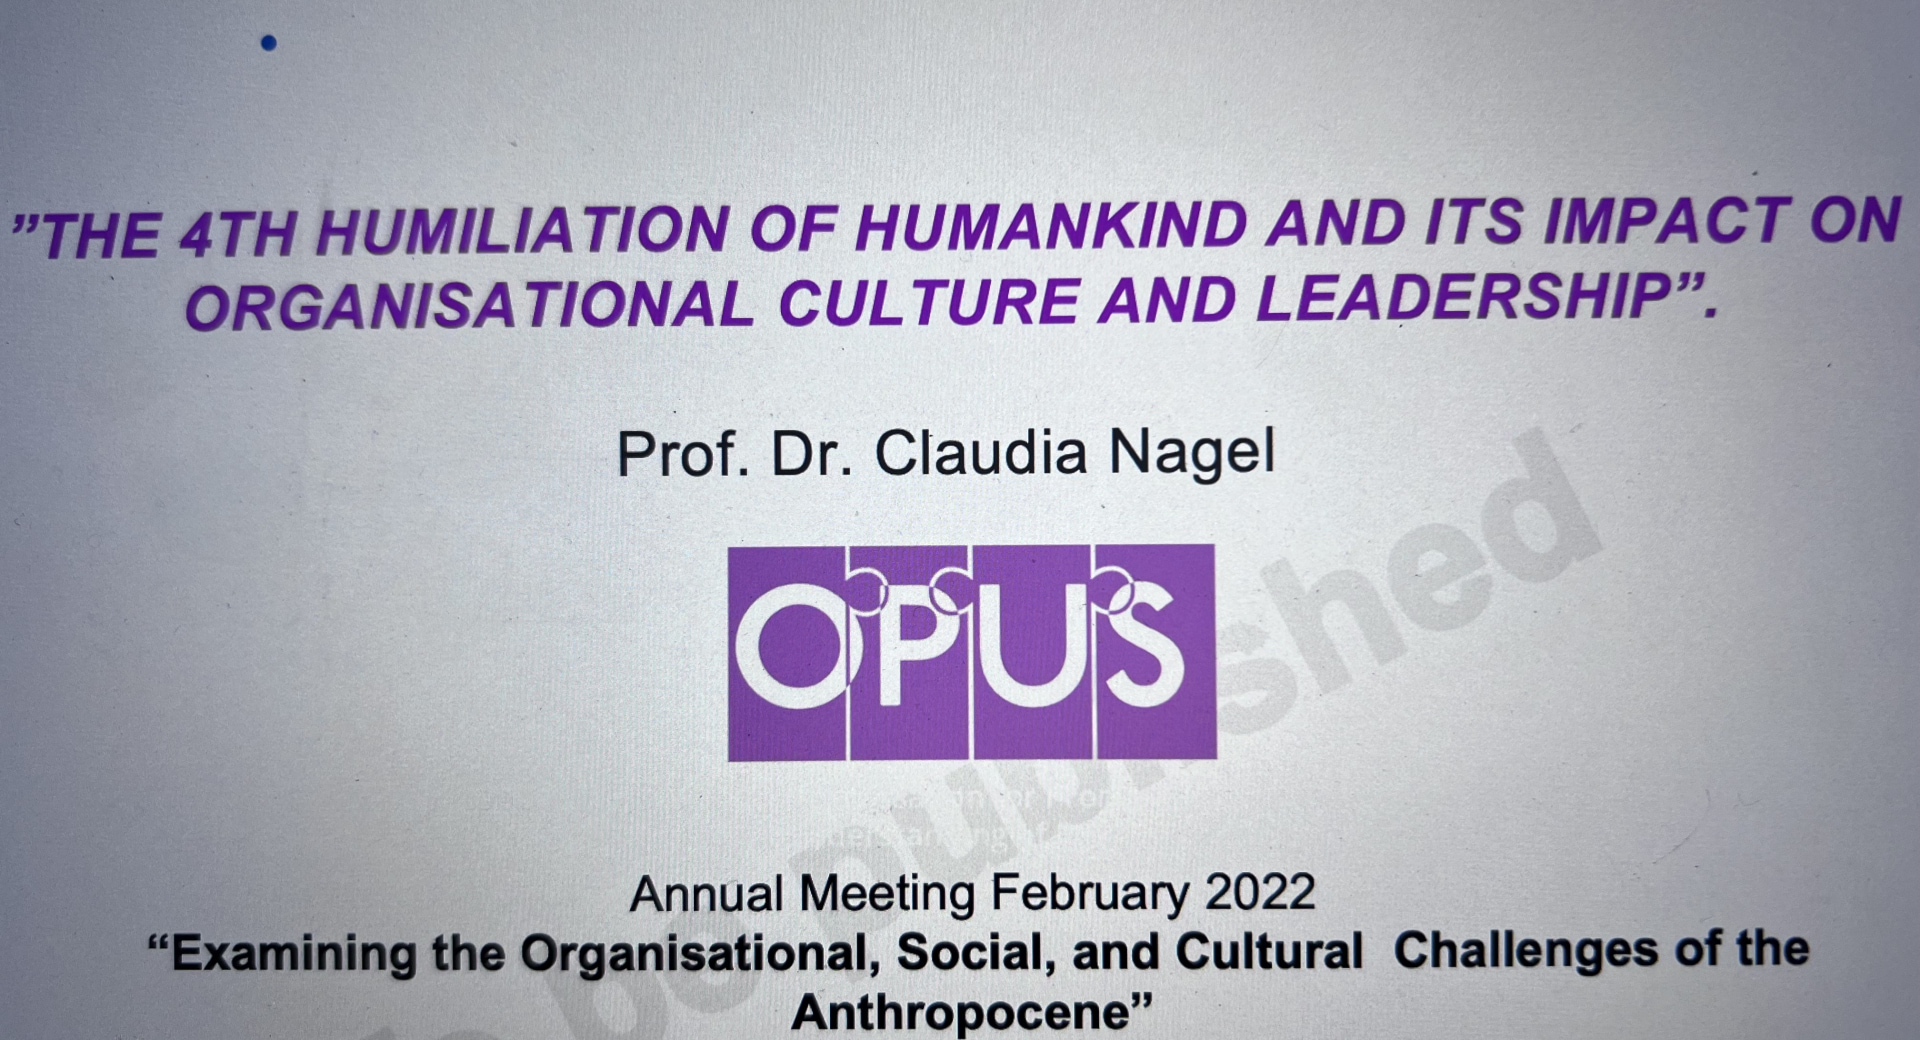 THE 4TH HUMILIATION OF HUMANKIND AND ITS IMPACT ON ORGANISATIONAL CULTURE AND LEADERSHIP